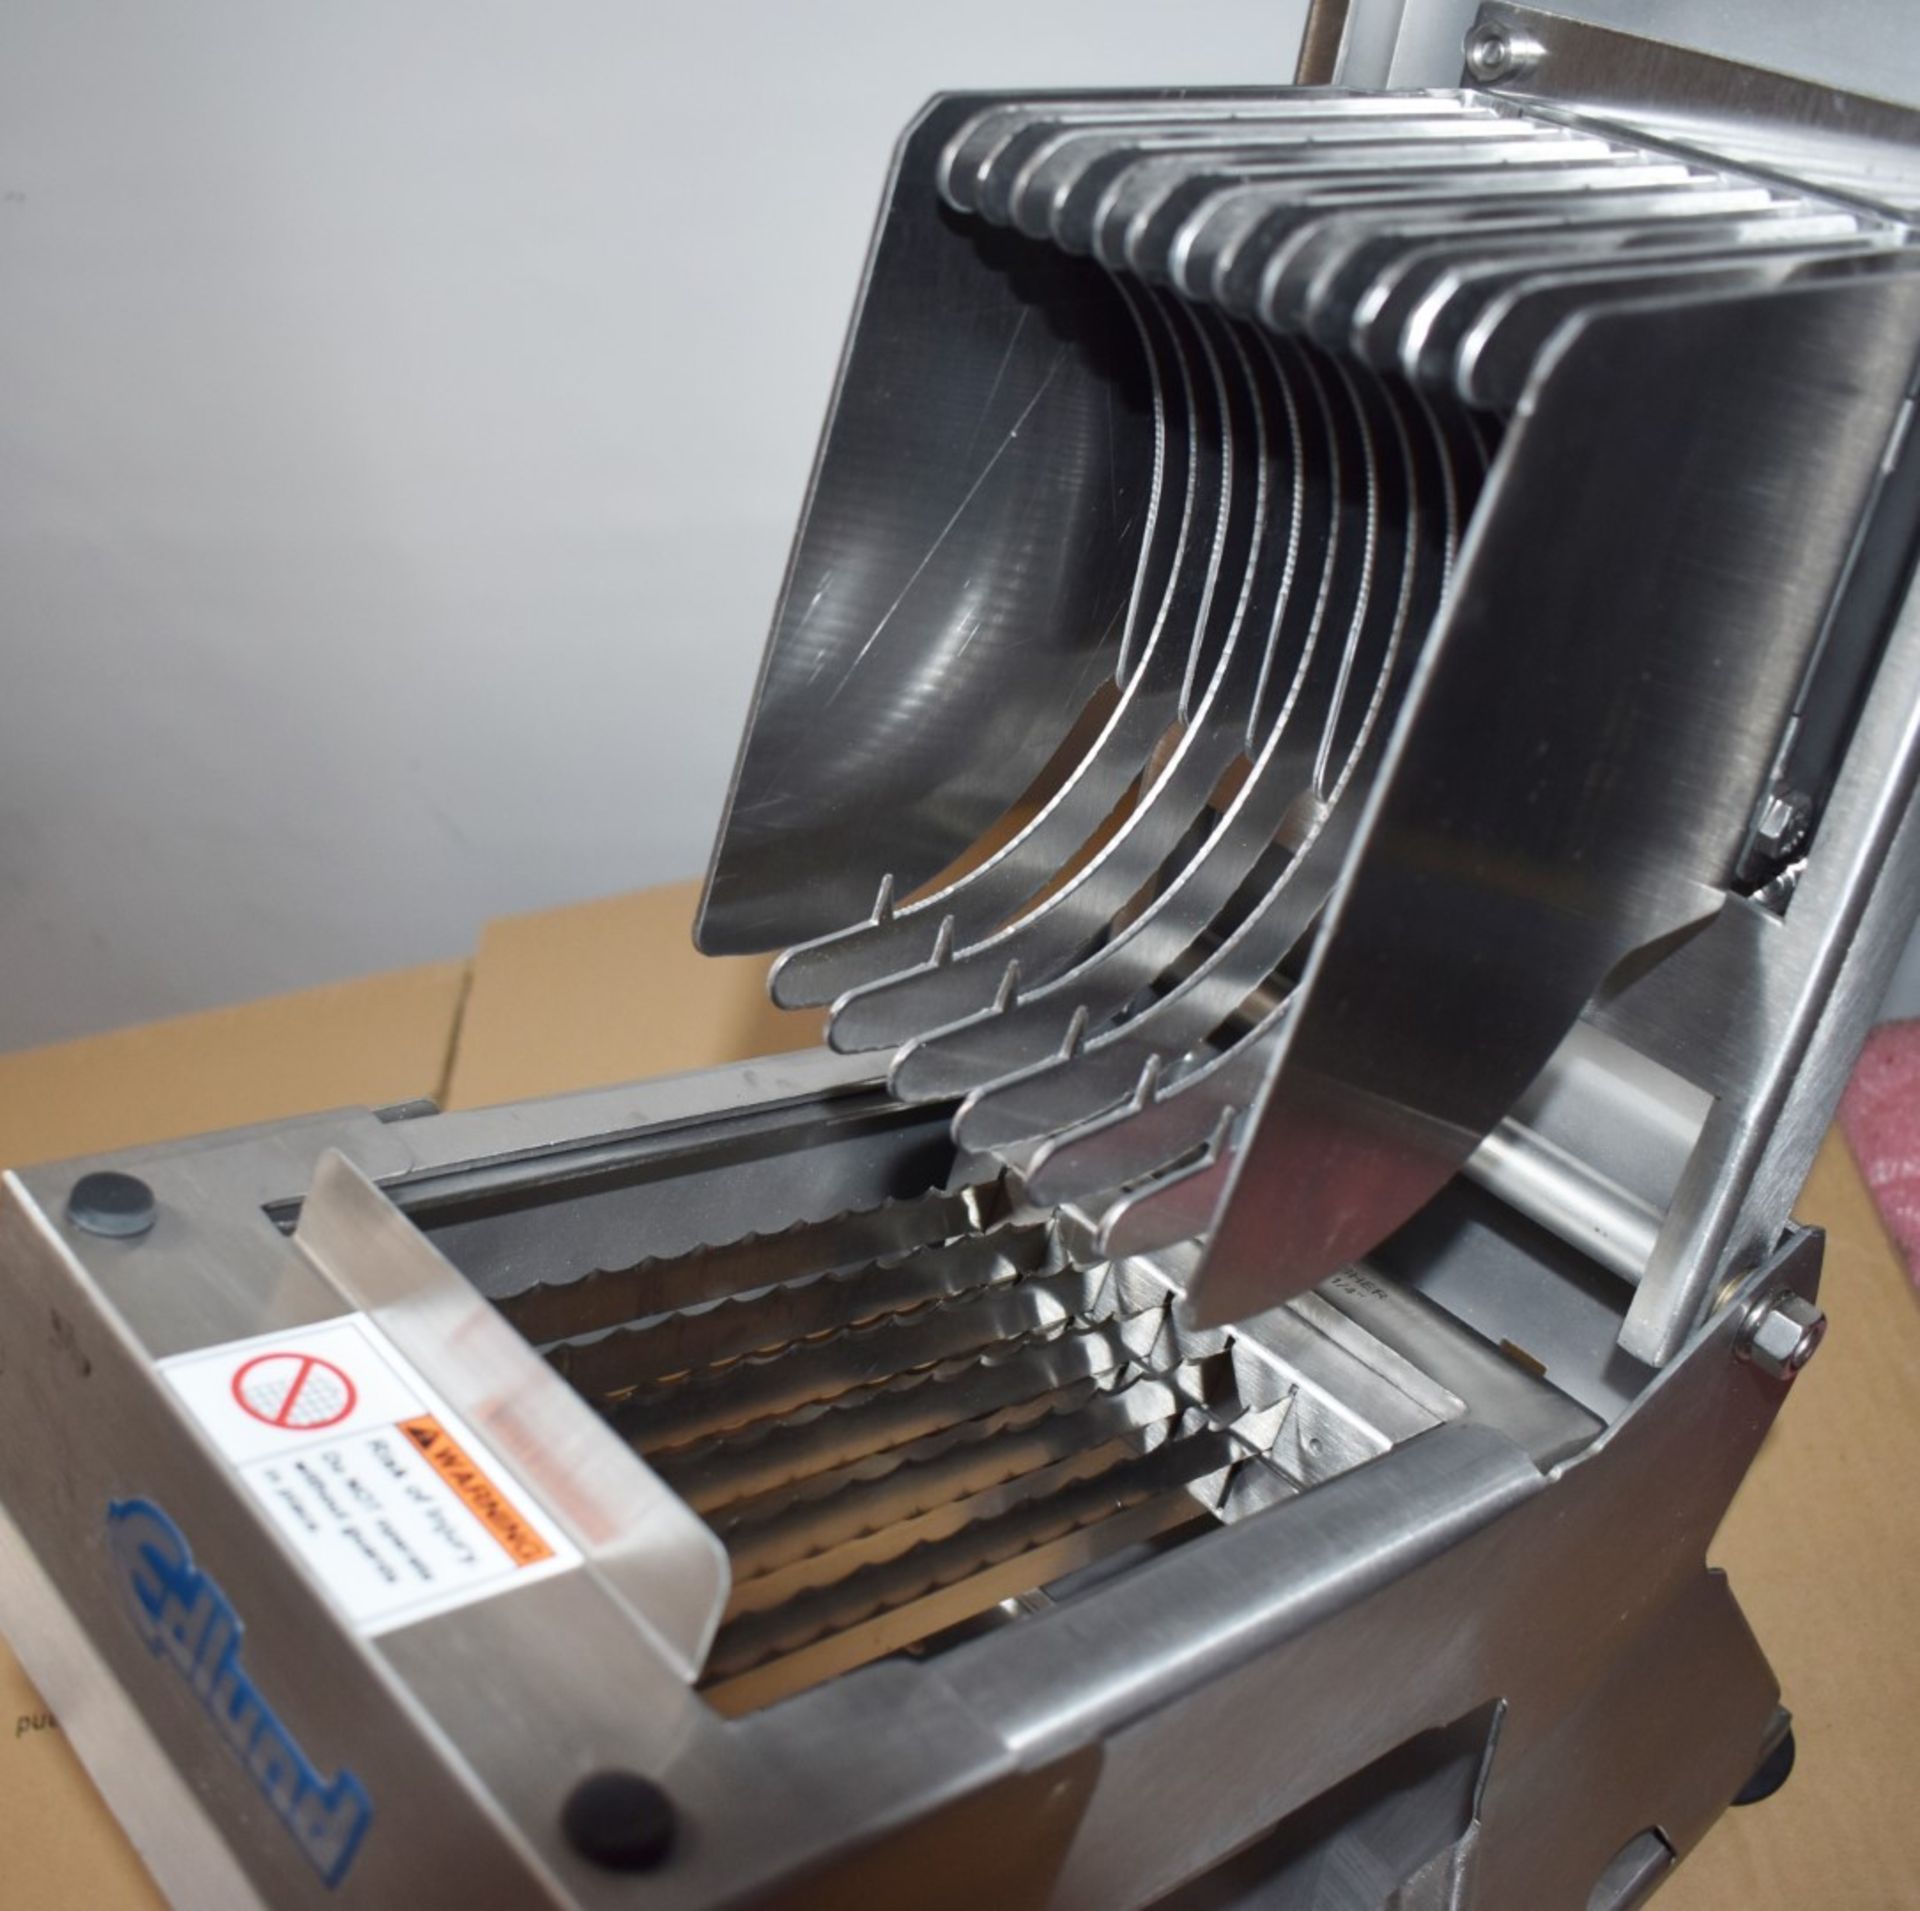 1 x Edlund XL-125 ARC Manual Fruit and Vegetable Slicer With Blades - CL232 - Ref114 - Location: - Image 8 of 11